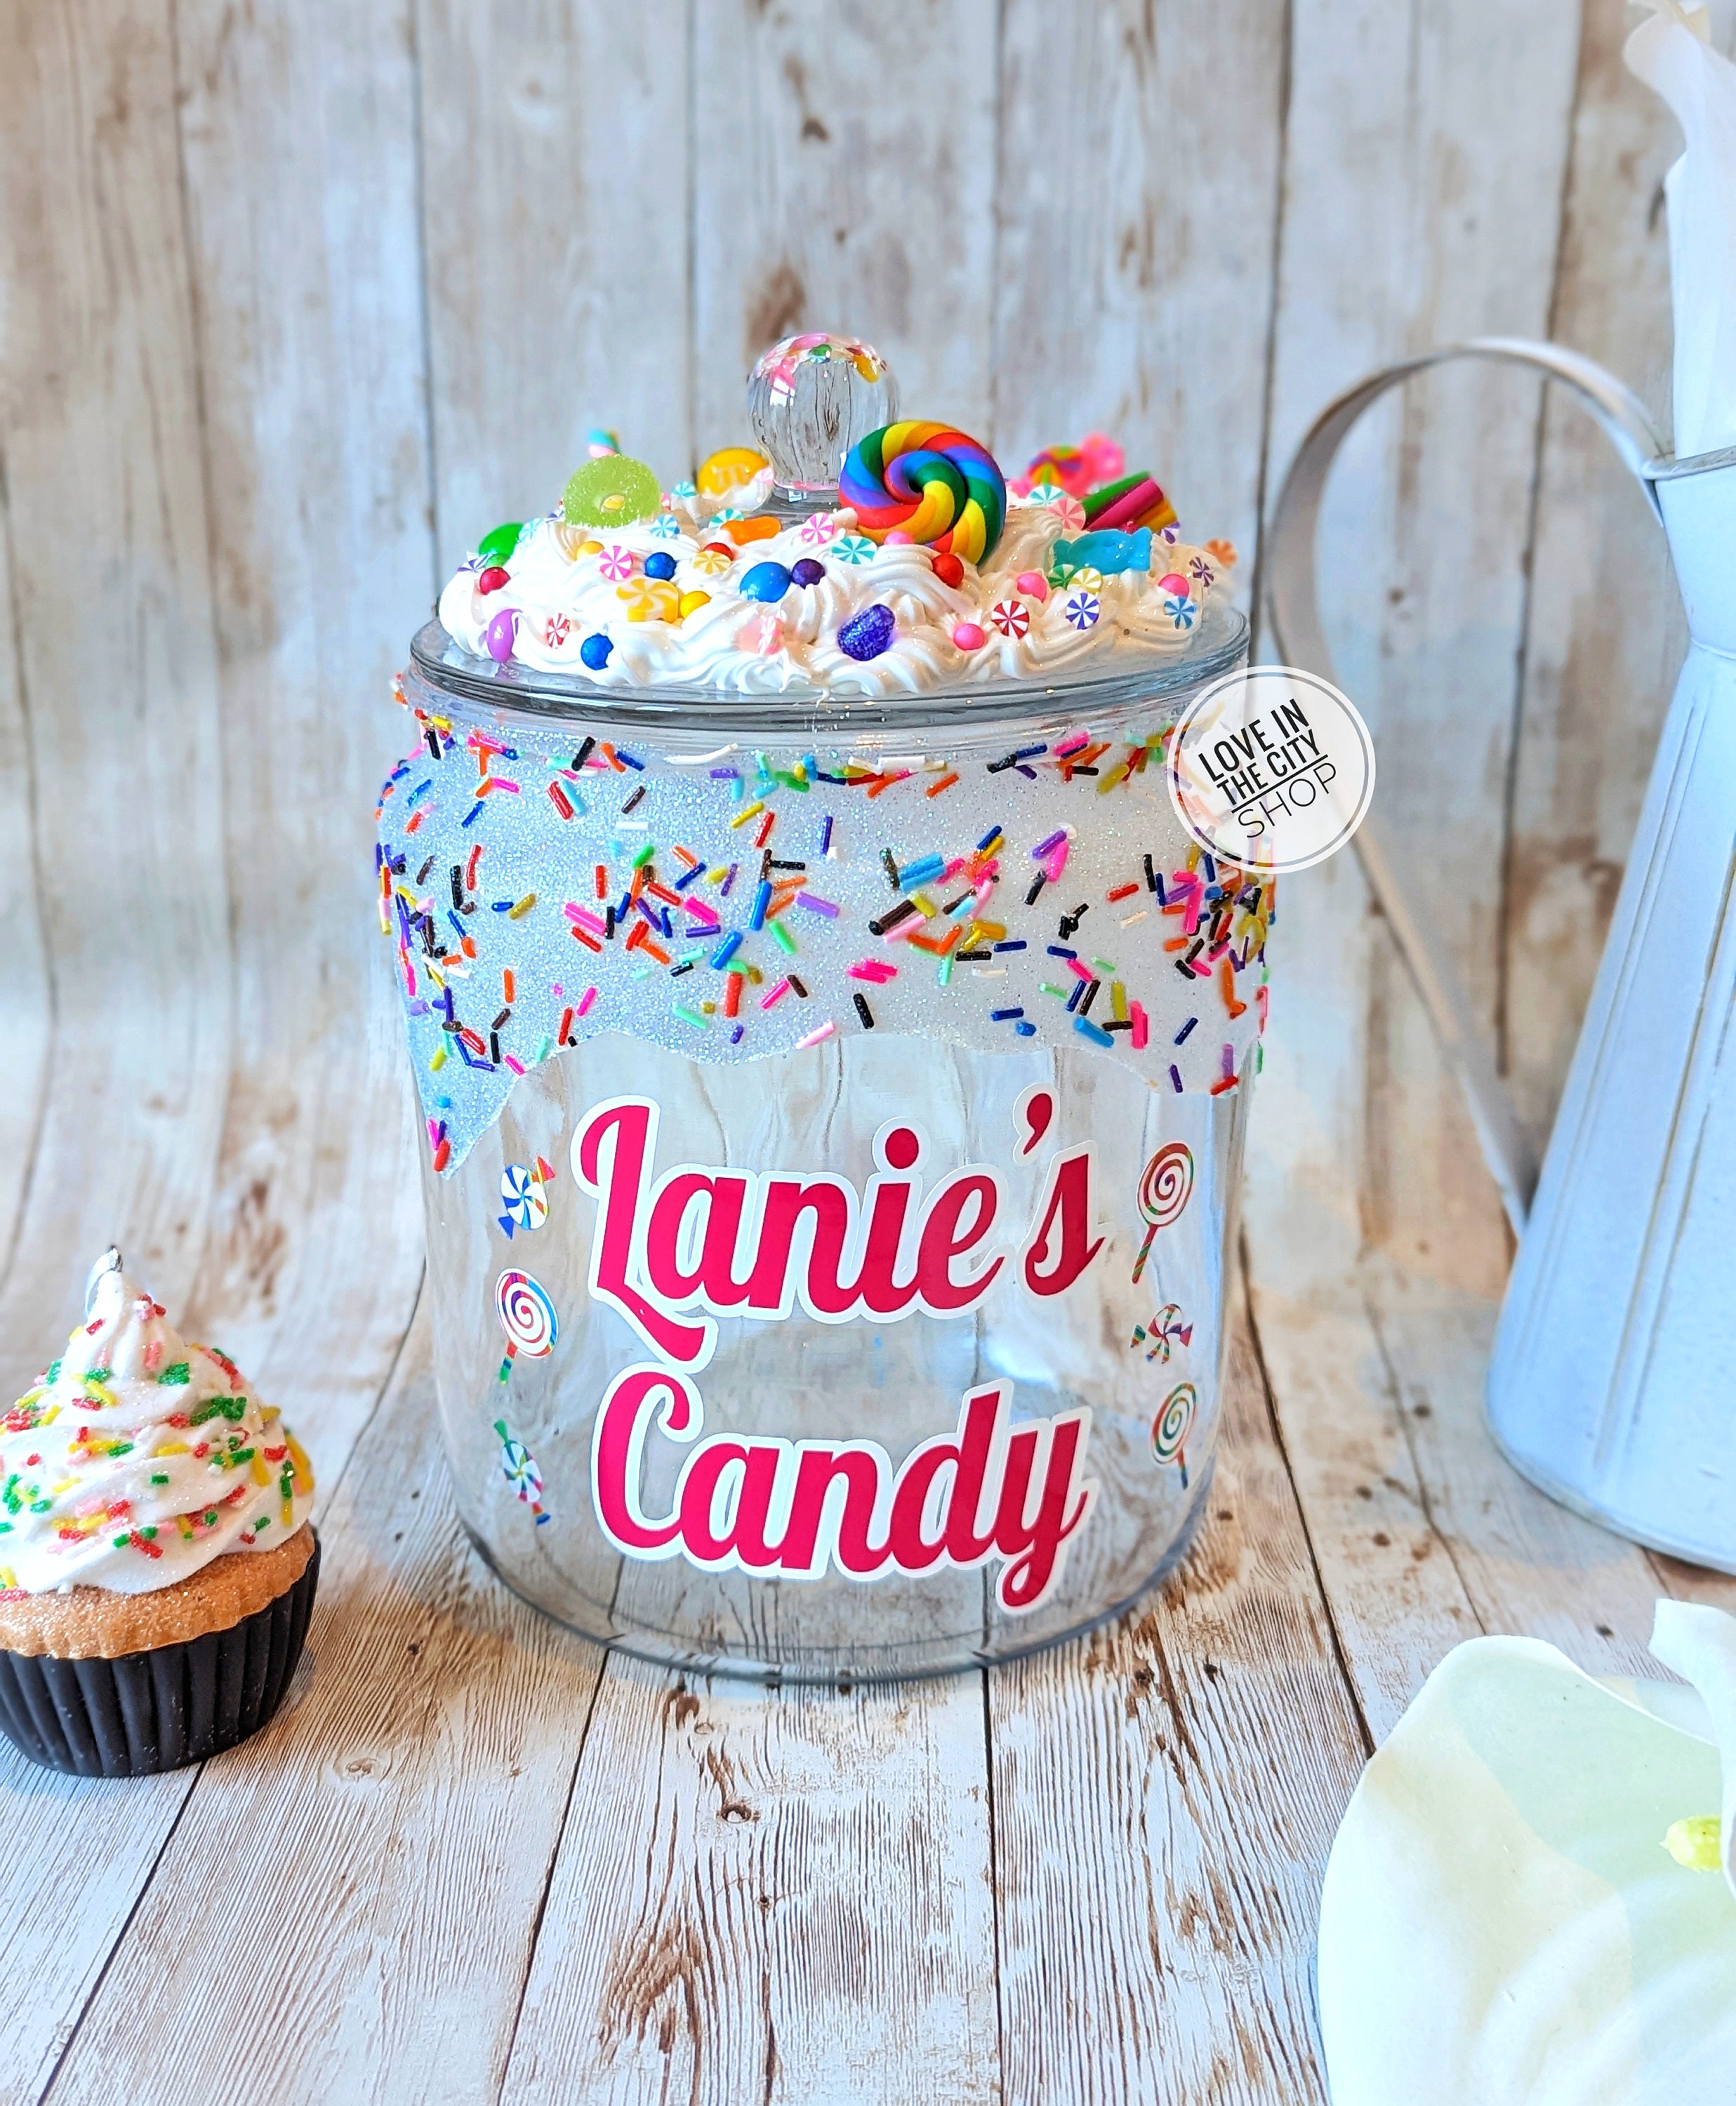 Personalized Cookie Jar – Love In The City Shop